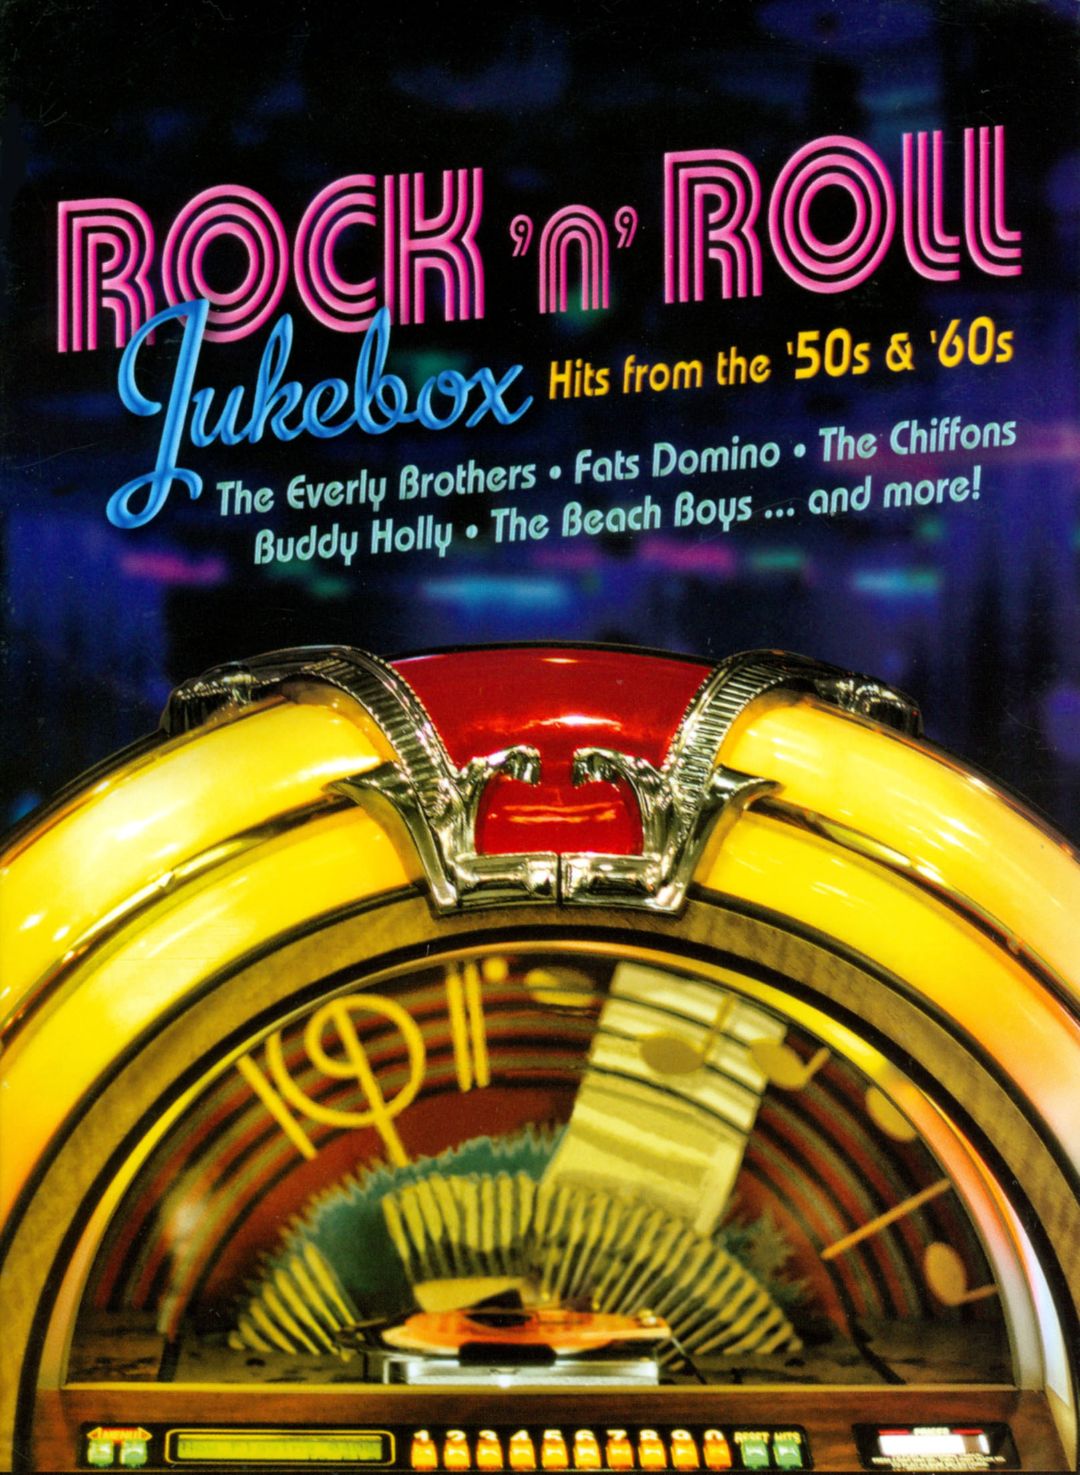 Best Buy: Rock 'n' Roll Jukebox: Hits from the '50s & '60s [CD]